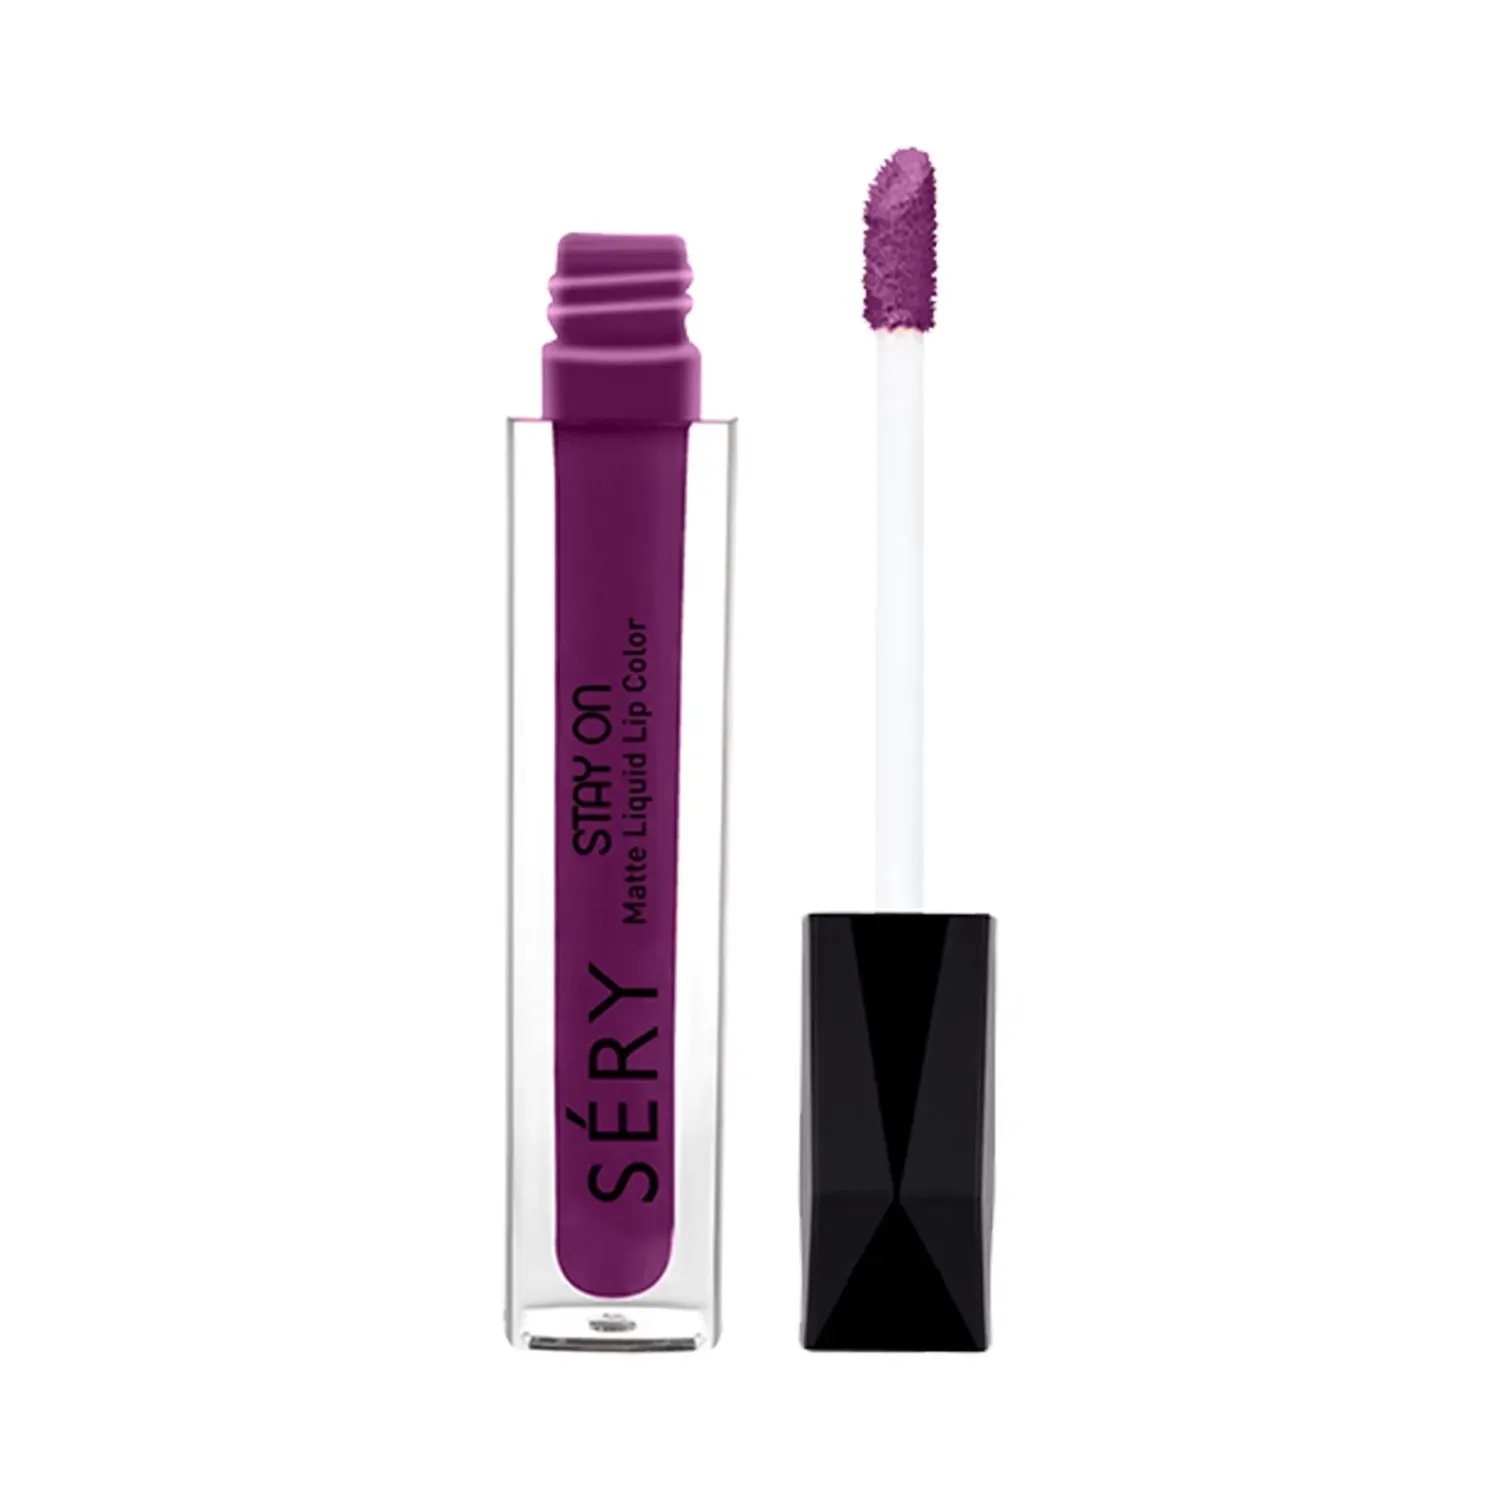 Sery Stay On Liquid Matte Lip Color - Sagria Pout LSO-15 (5ml)